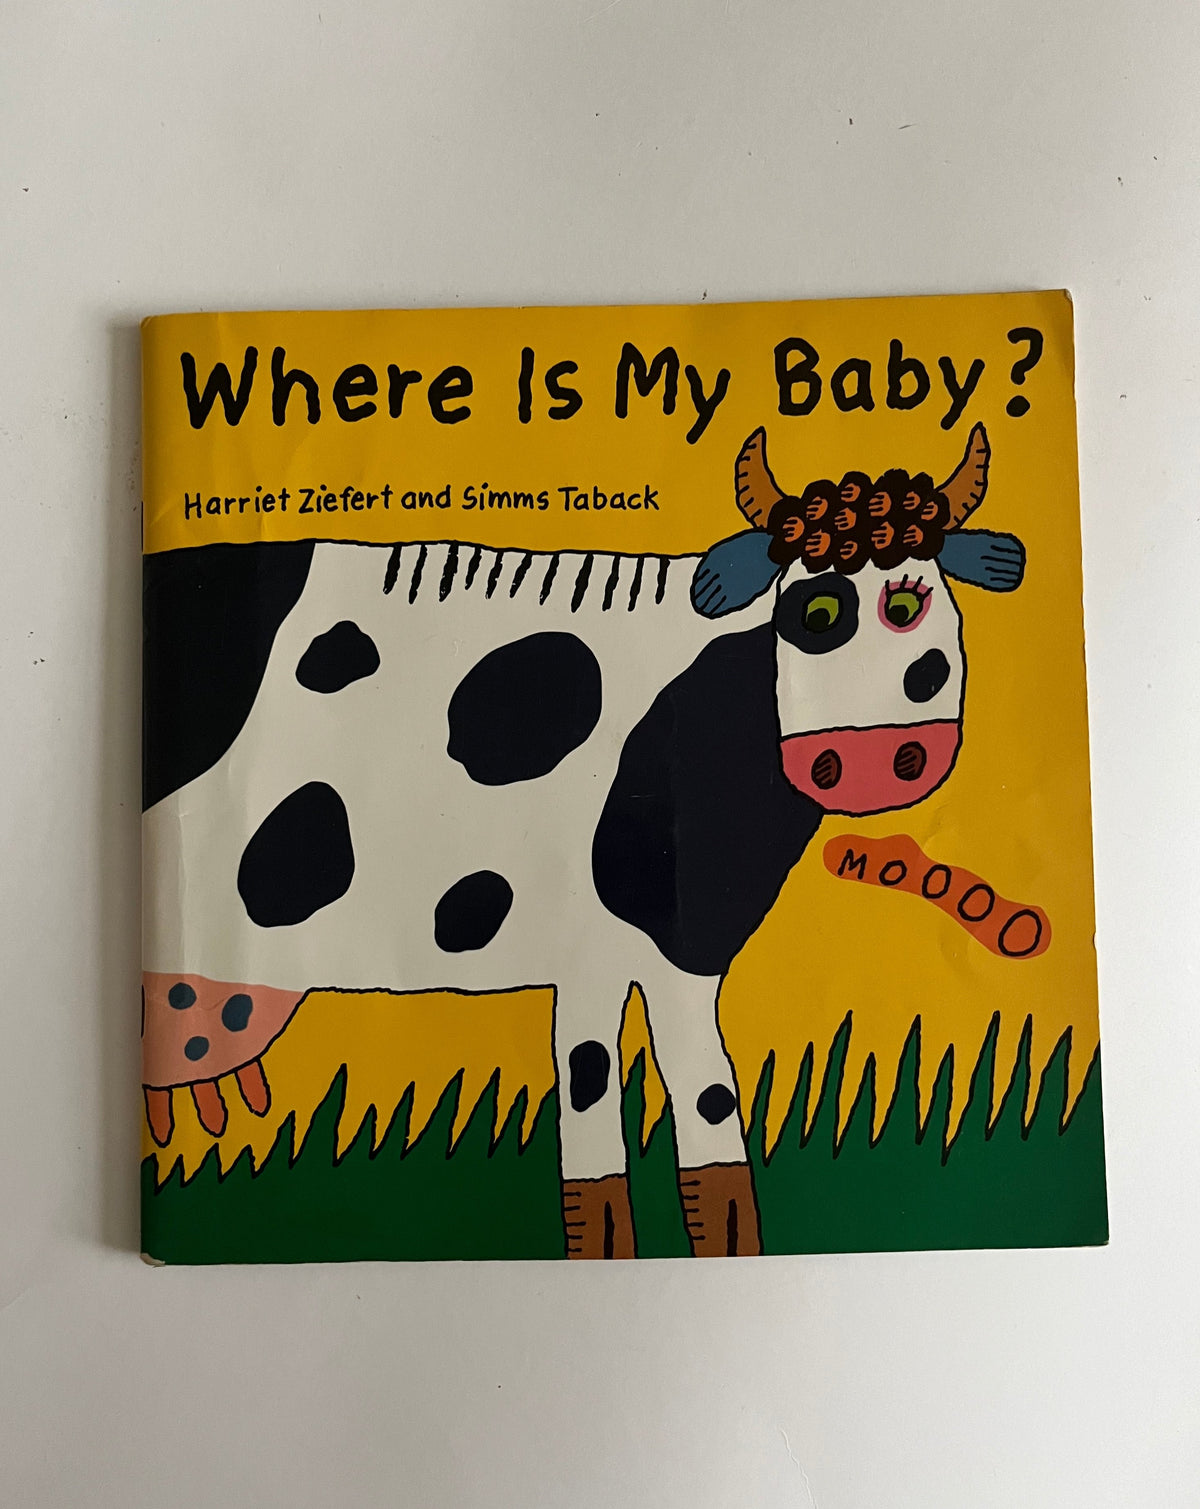 Where is My Baby? by Harriet Ziefert and Simms Taback